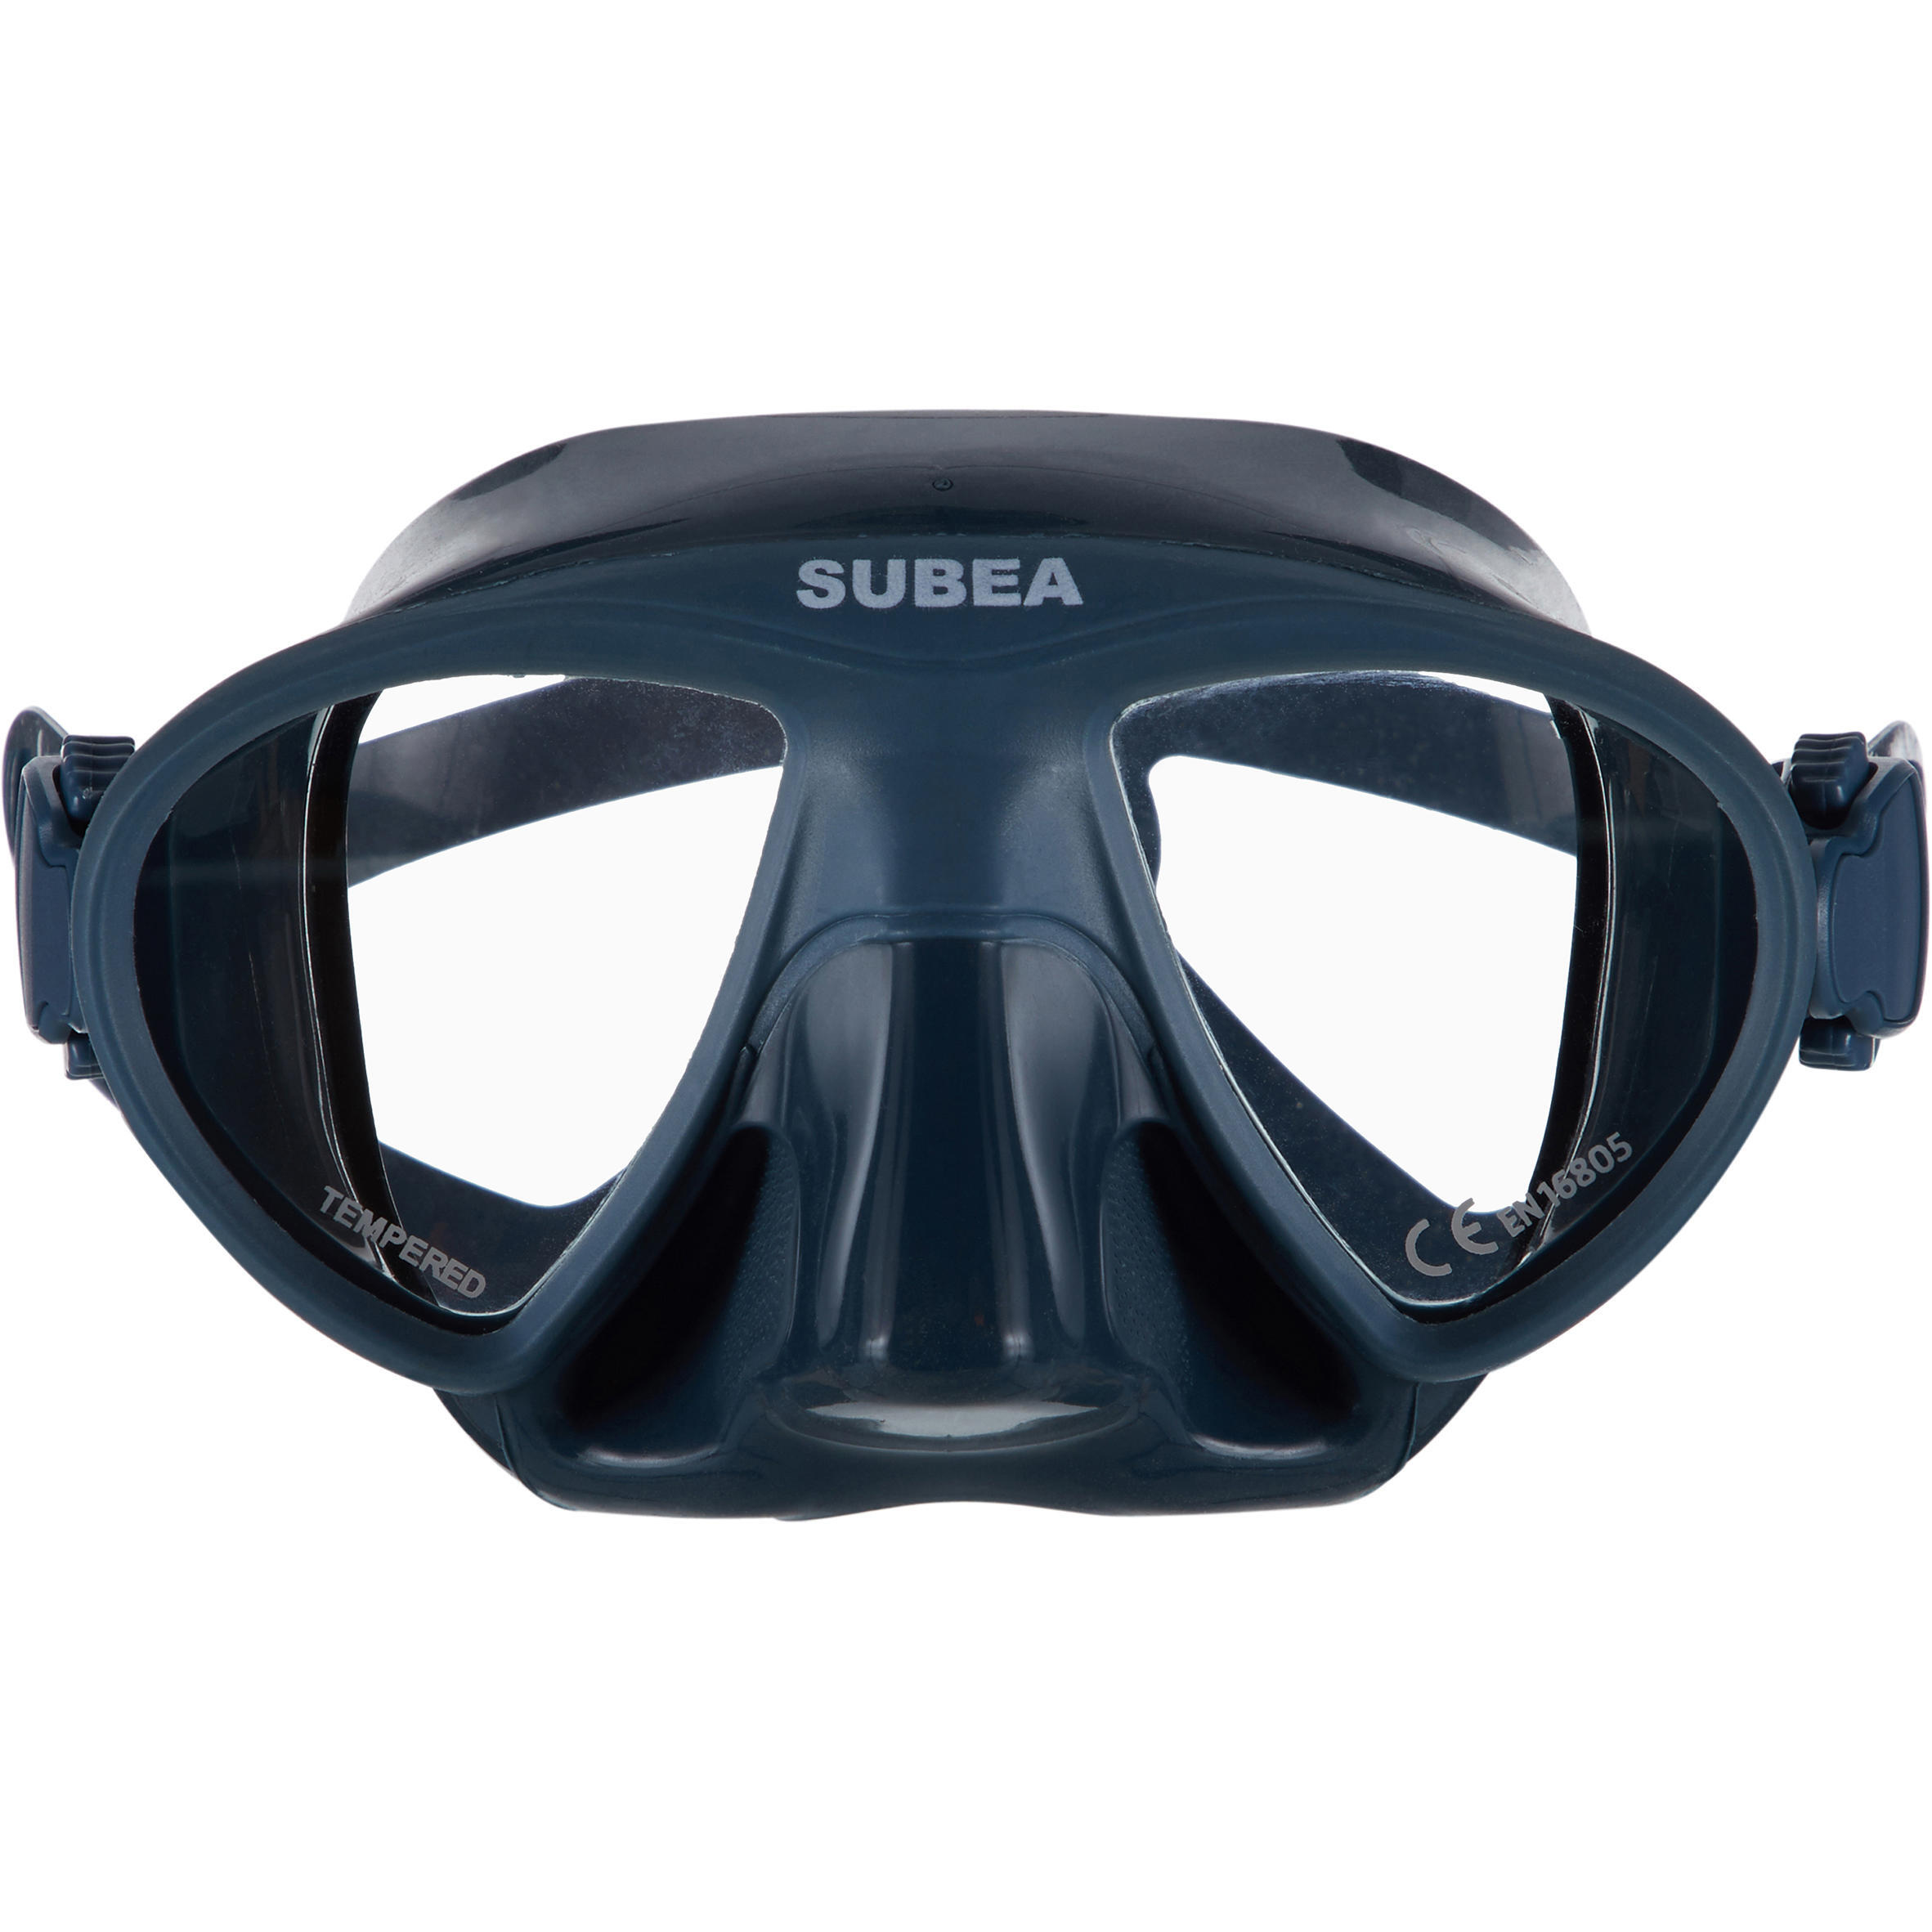 FRD 900 Freediving mask small volume - storm grey 3/10